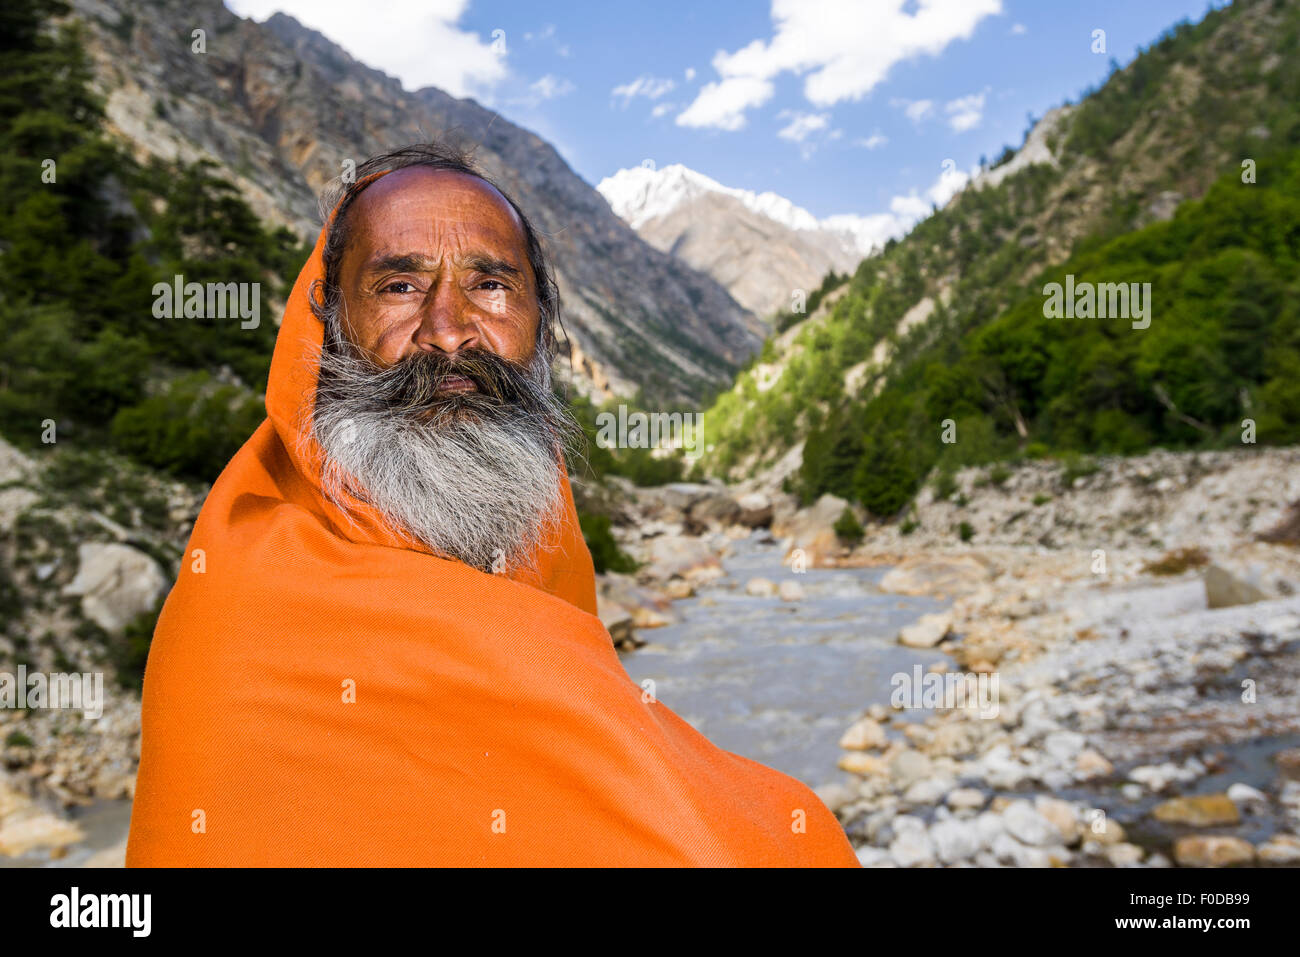 A portrait of Mahant Naomi Giri, a 52 years old Sadhu, sitting at the banks of the holy river Ganges Stock Photo